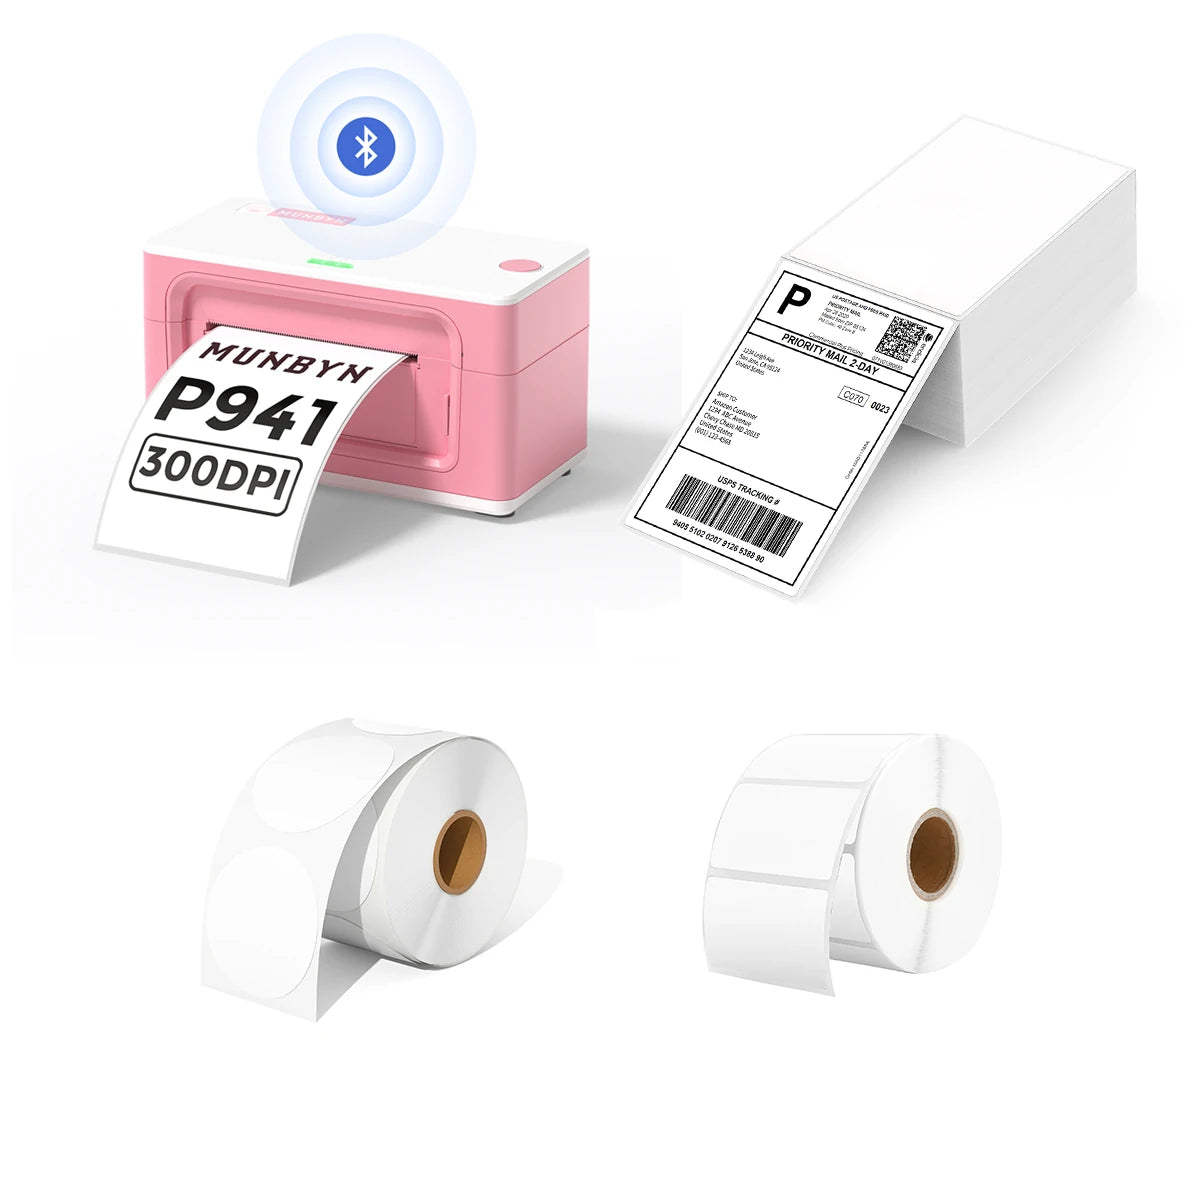 MUNBYN P941B pink Bluetooth Thermal Label Printer Kit includes a pink Bluetooth label printer, two rolls of blank labels, and a stack of shipping labels.